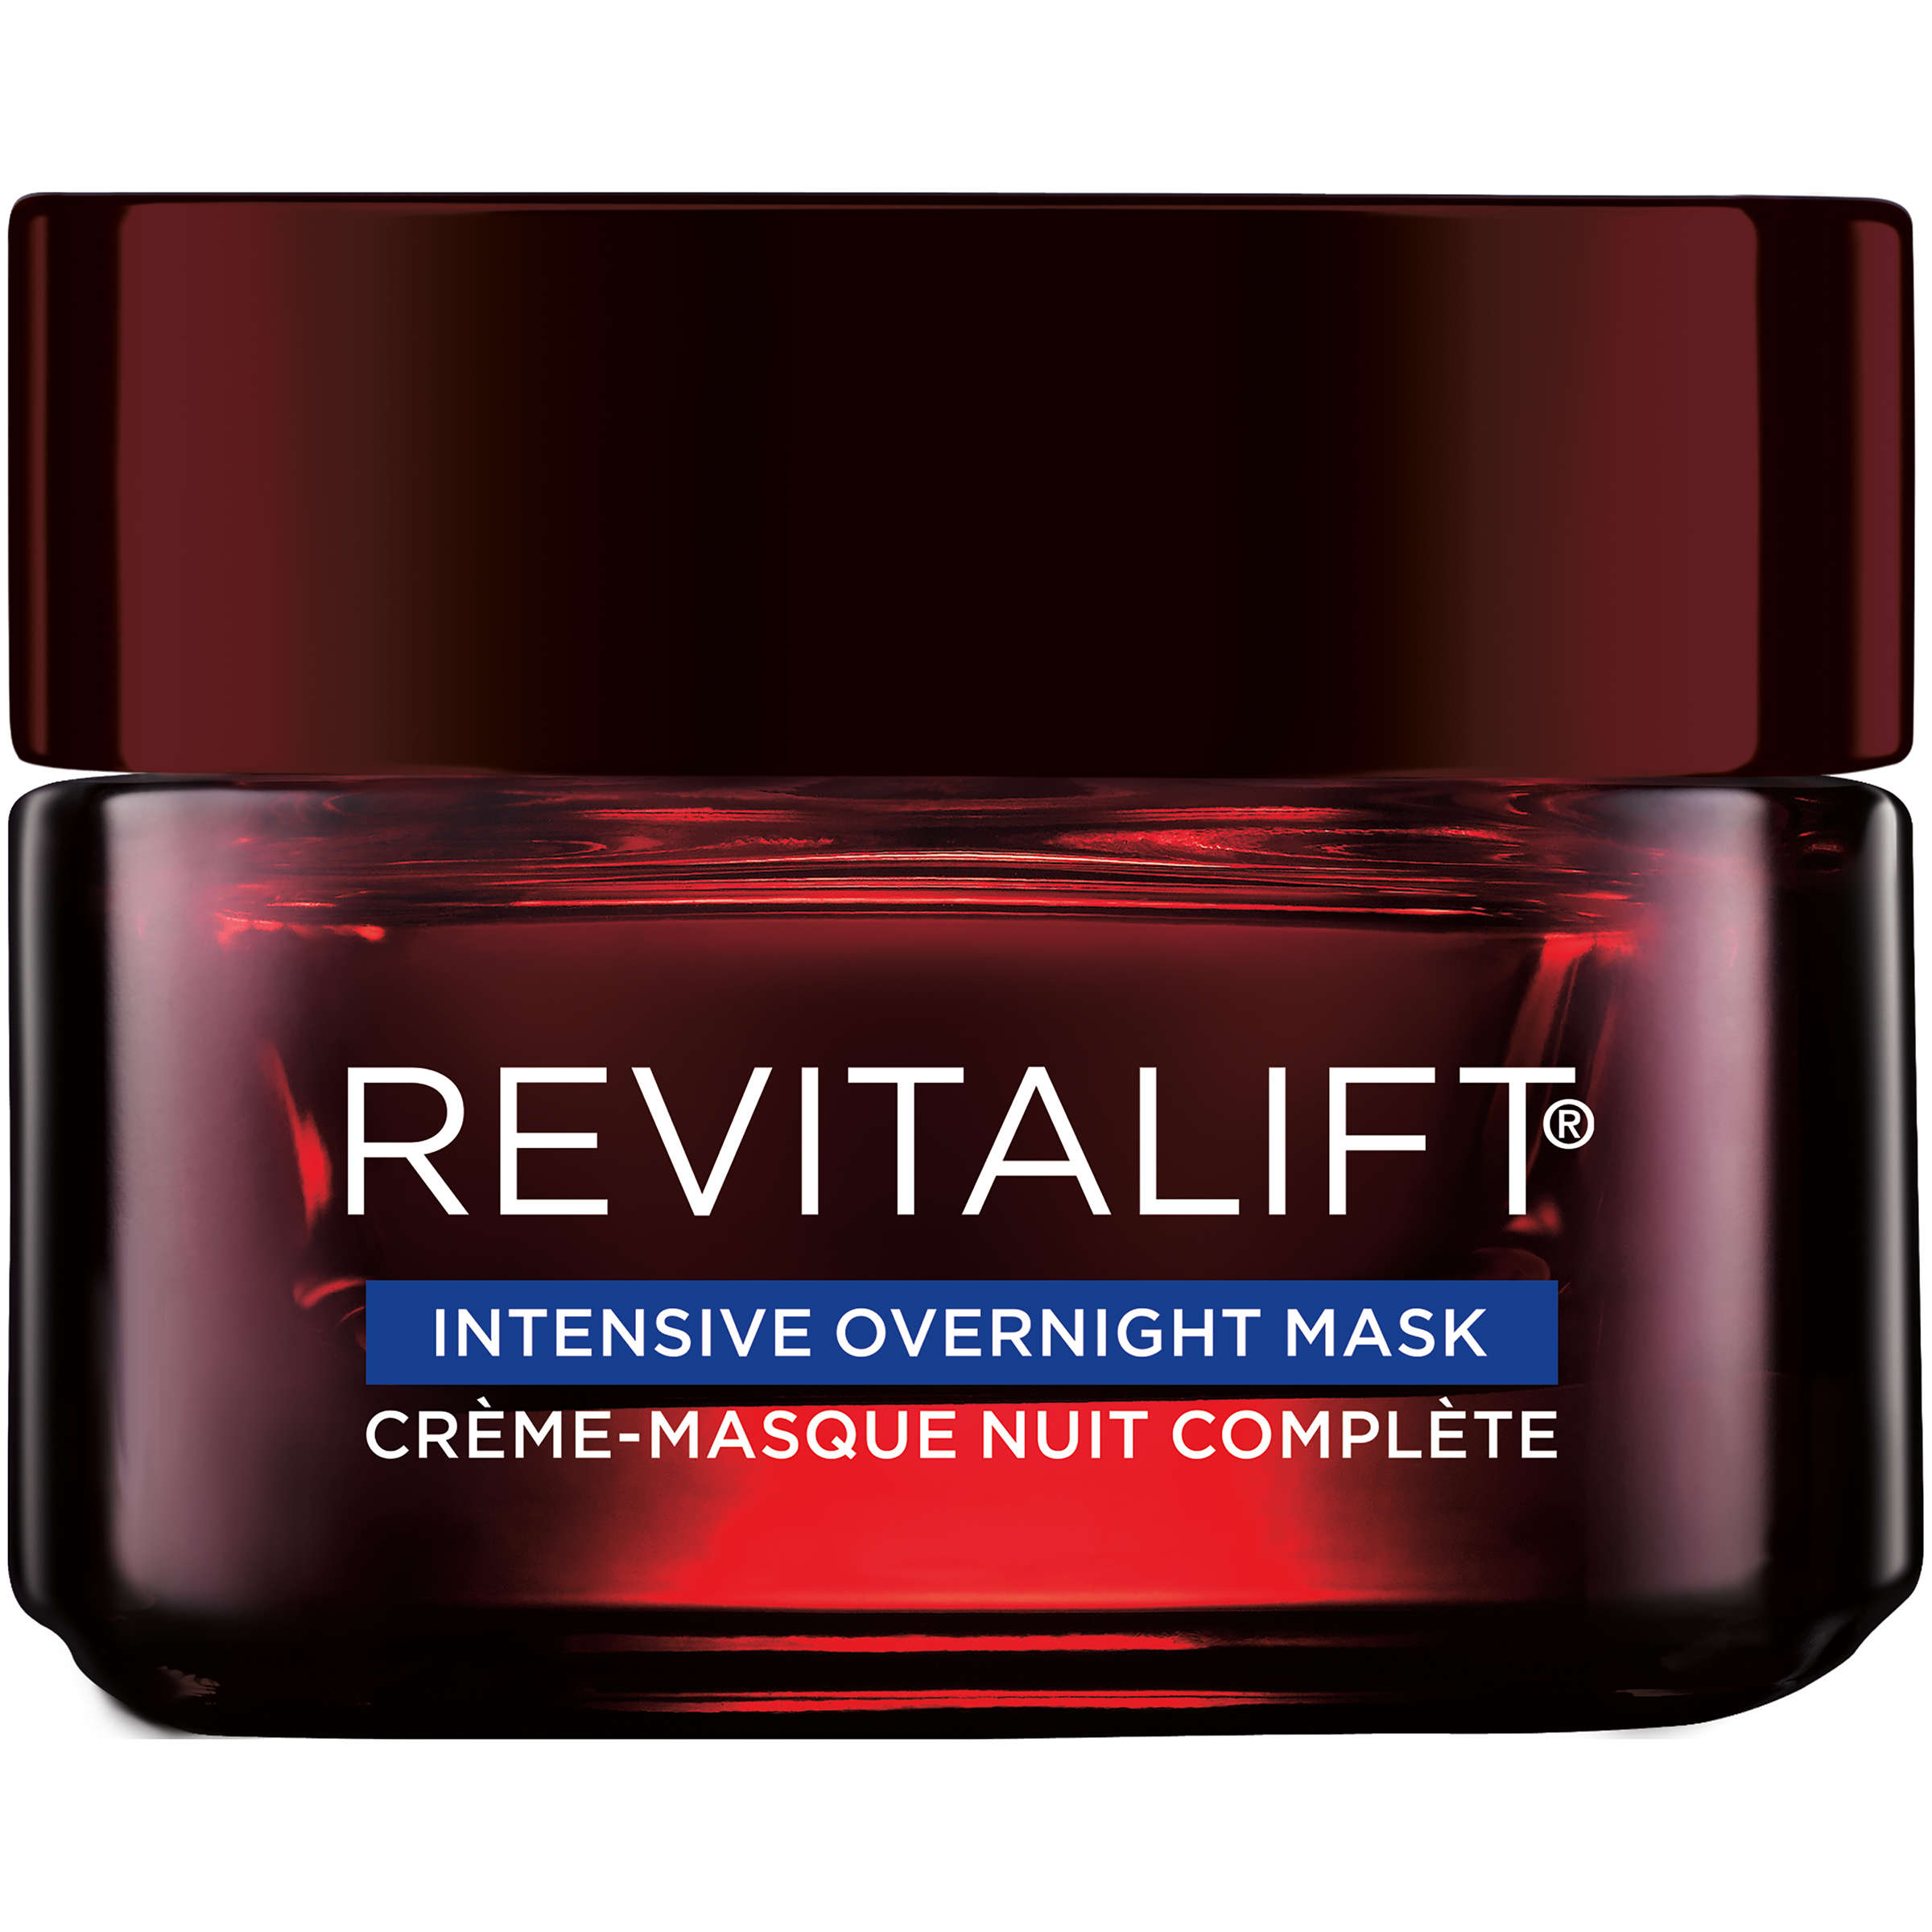 cismis LOreal Paris Advanced Revita Lift Triple Power Intensive Overnight Mask - Night Cream for all Skin Types: 10 Best Night Creams Available In India